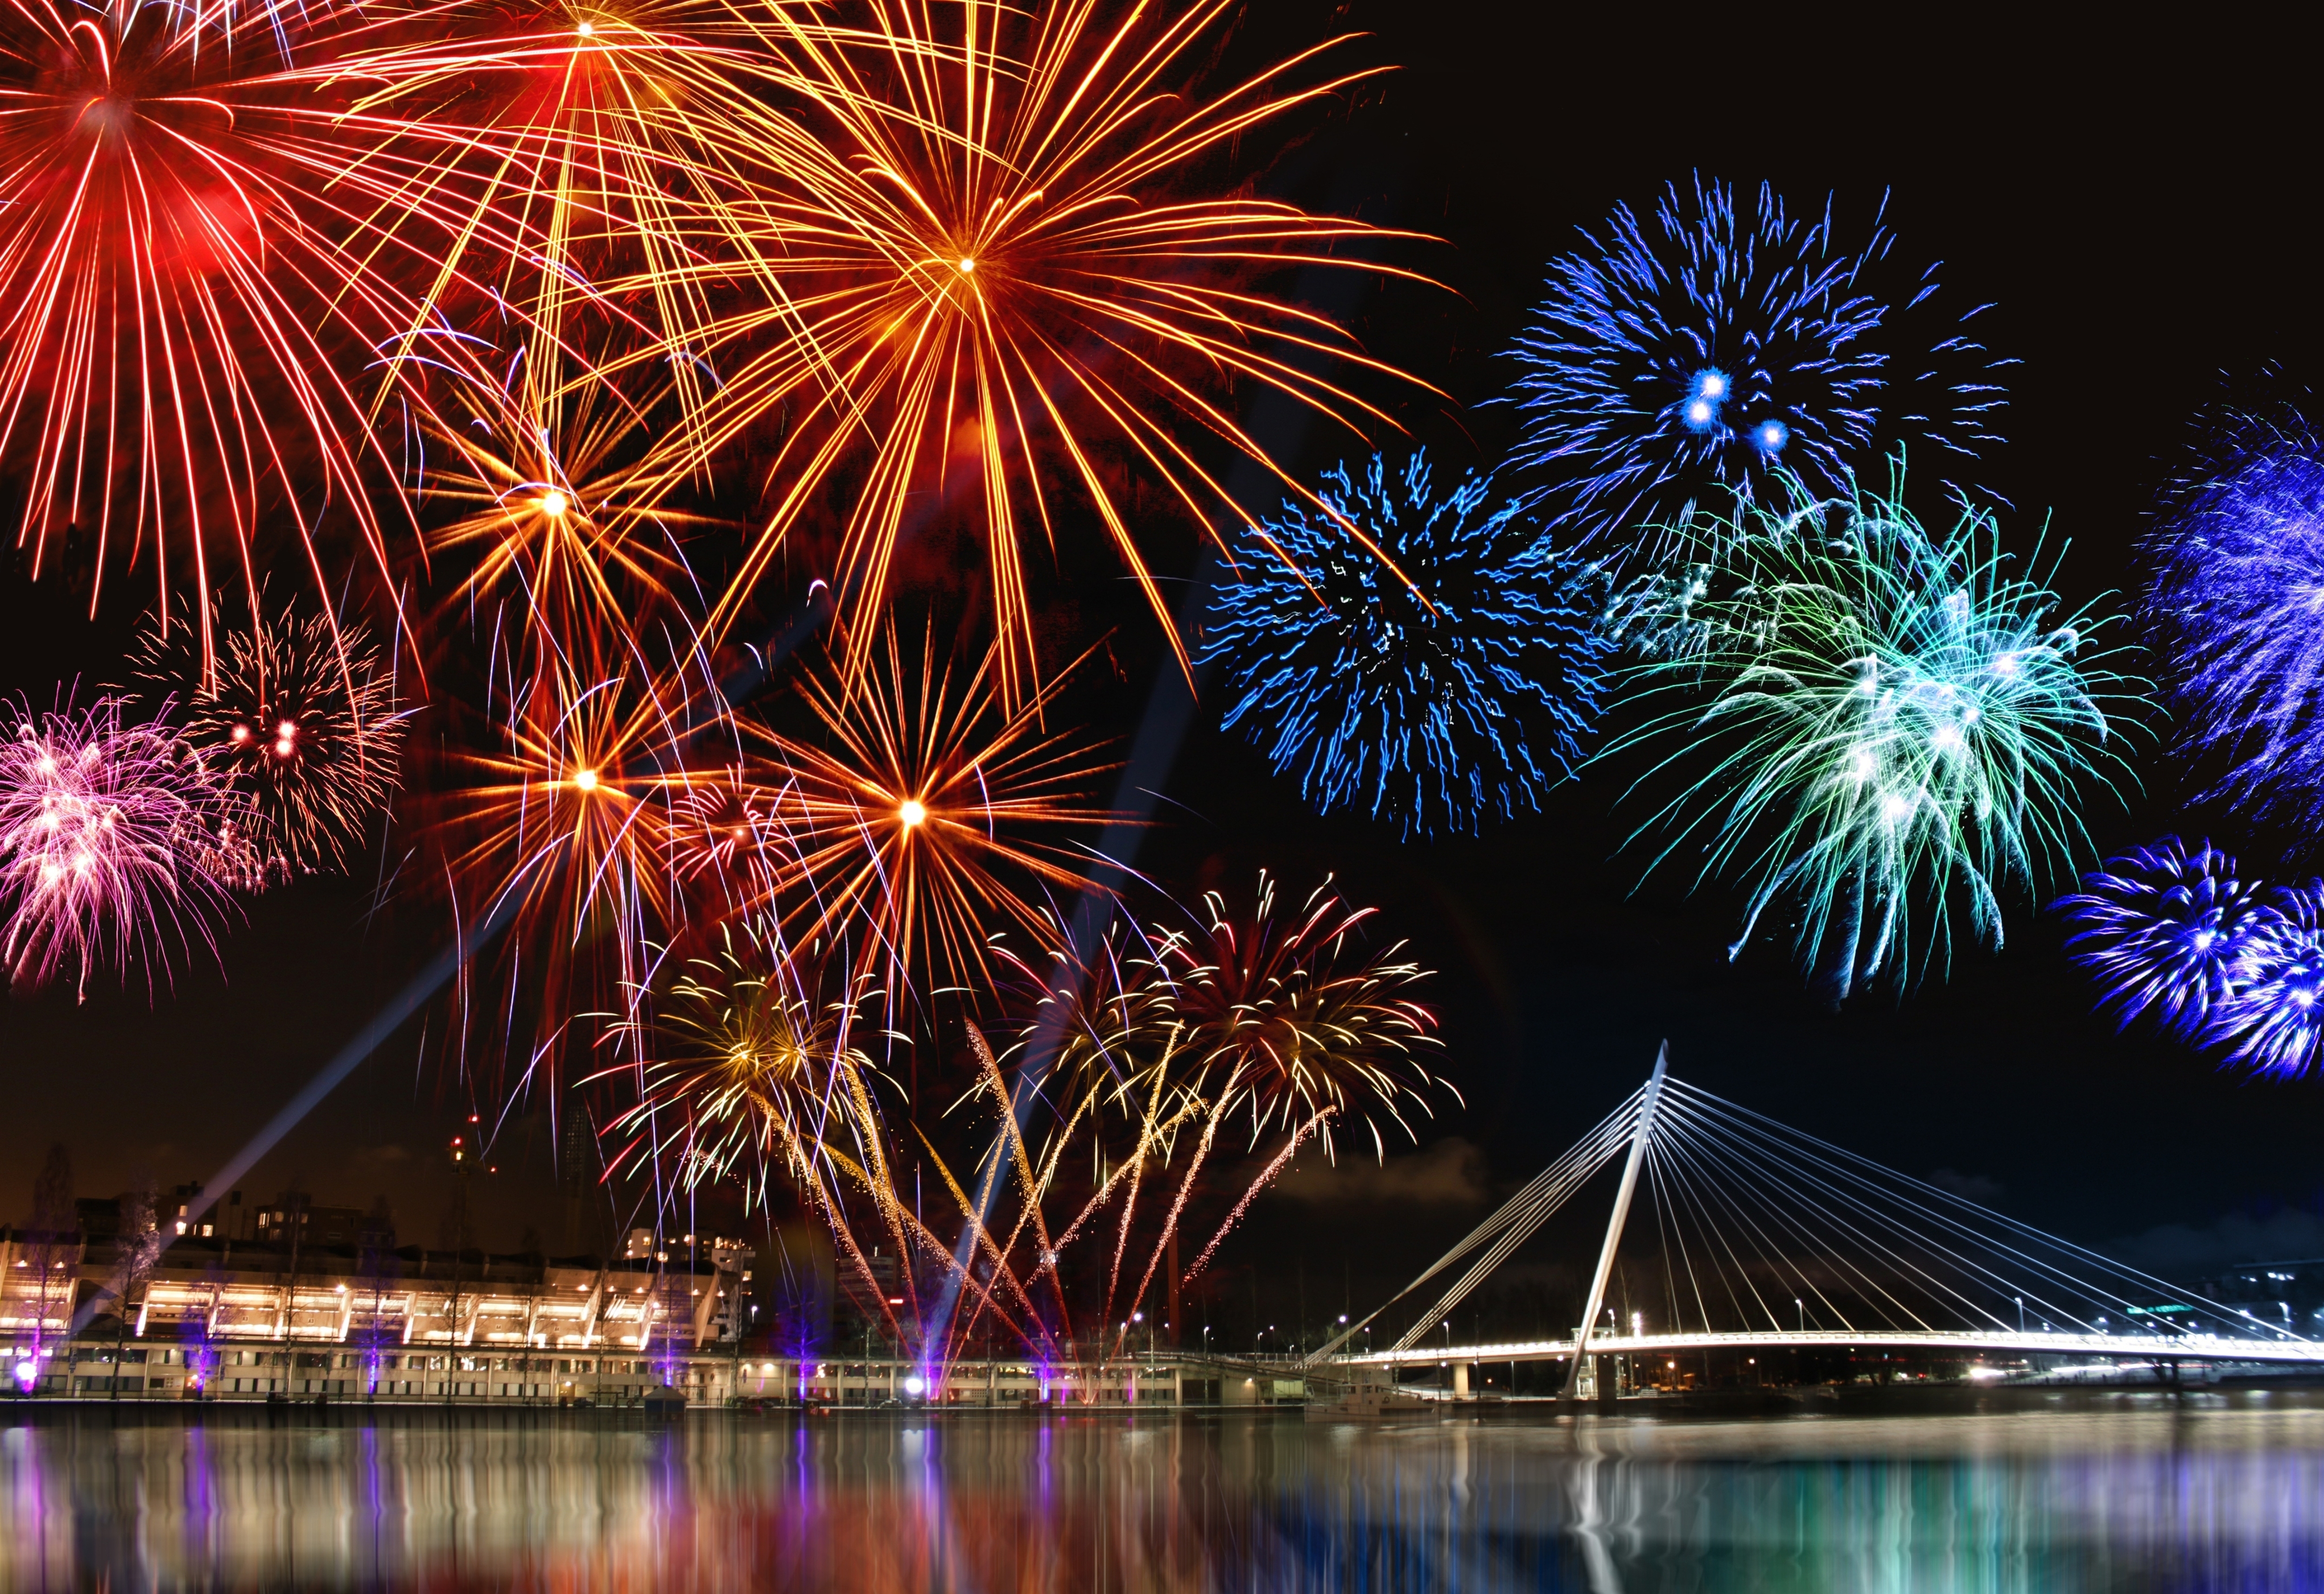 1920x1080 Background photography, fireworks, bridge, city, colorful, colors, new year, night